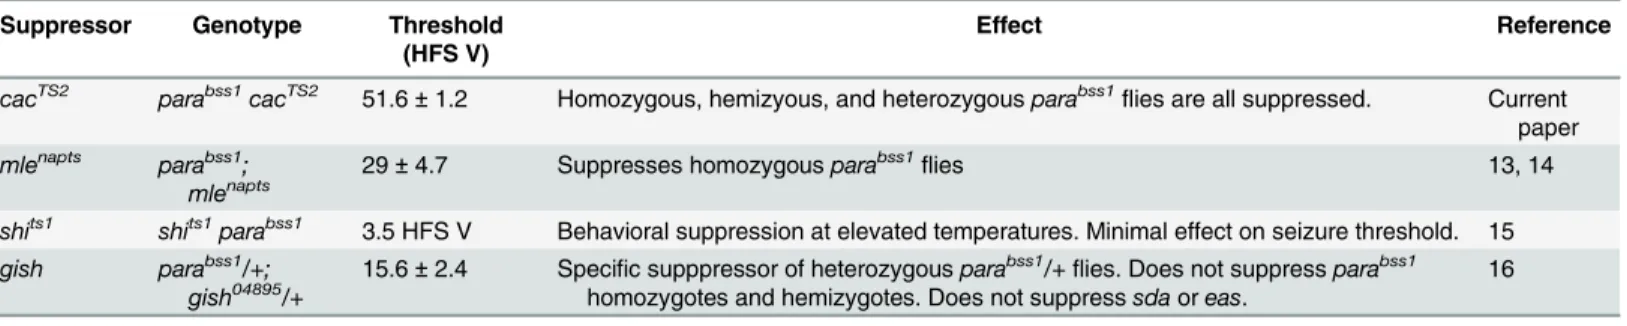 Table 2. Seizure suppression of para bss1 by cac TS2 and other suppressors. The table lists four mutations that have been reported to revert para bss1 phe- phe-notypes in double mutant combinations